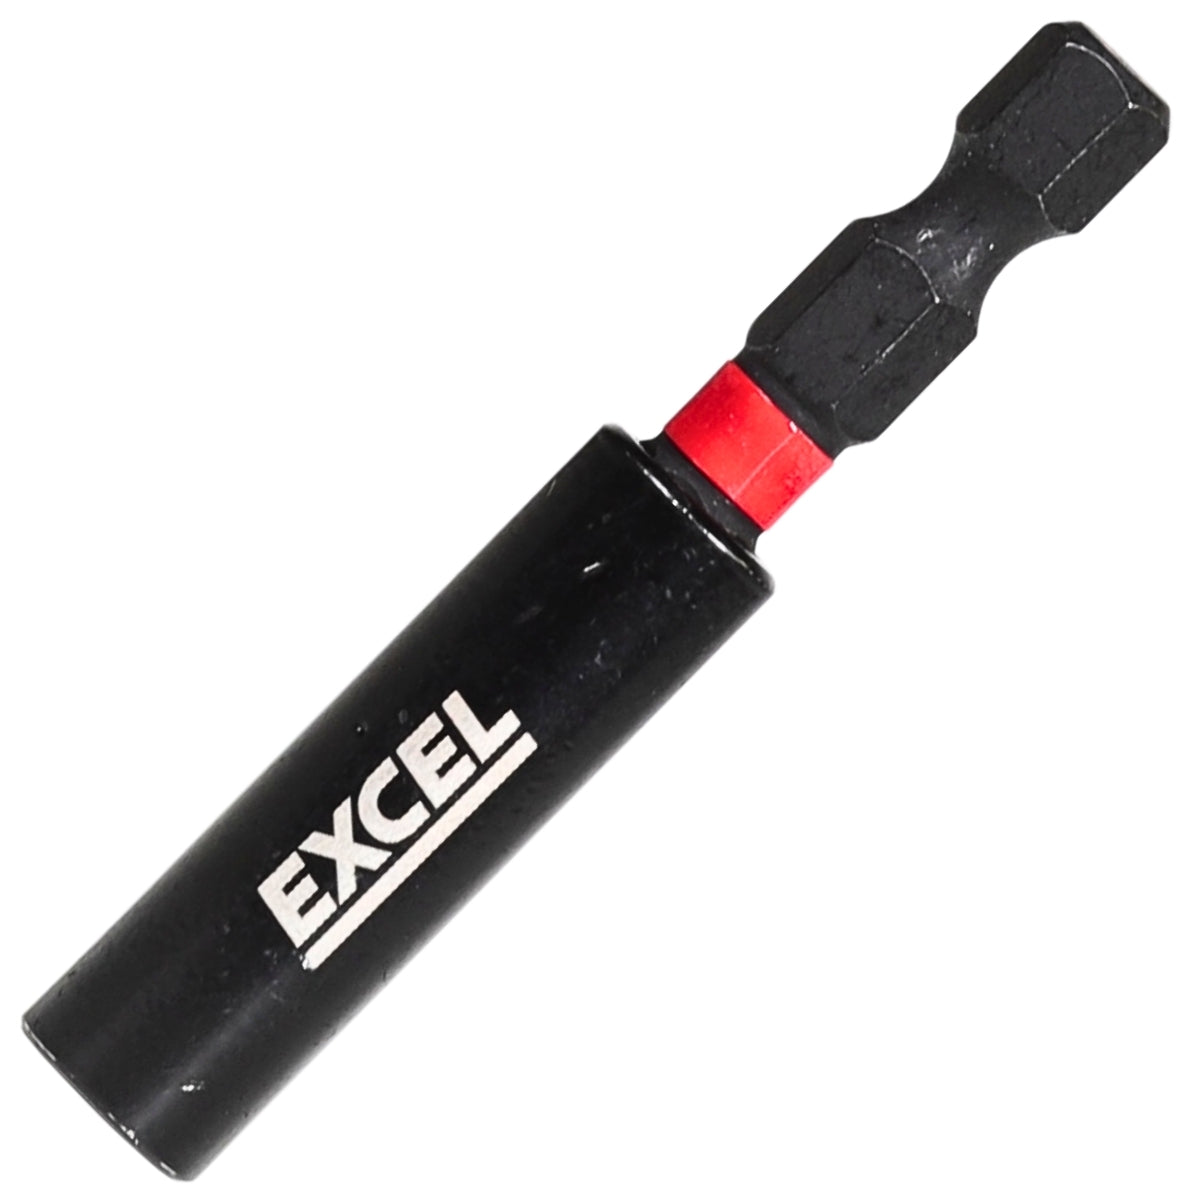 Excel 60mm Magnetic Impact Bit Holder with Blister Card